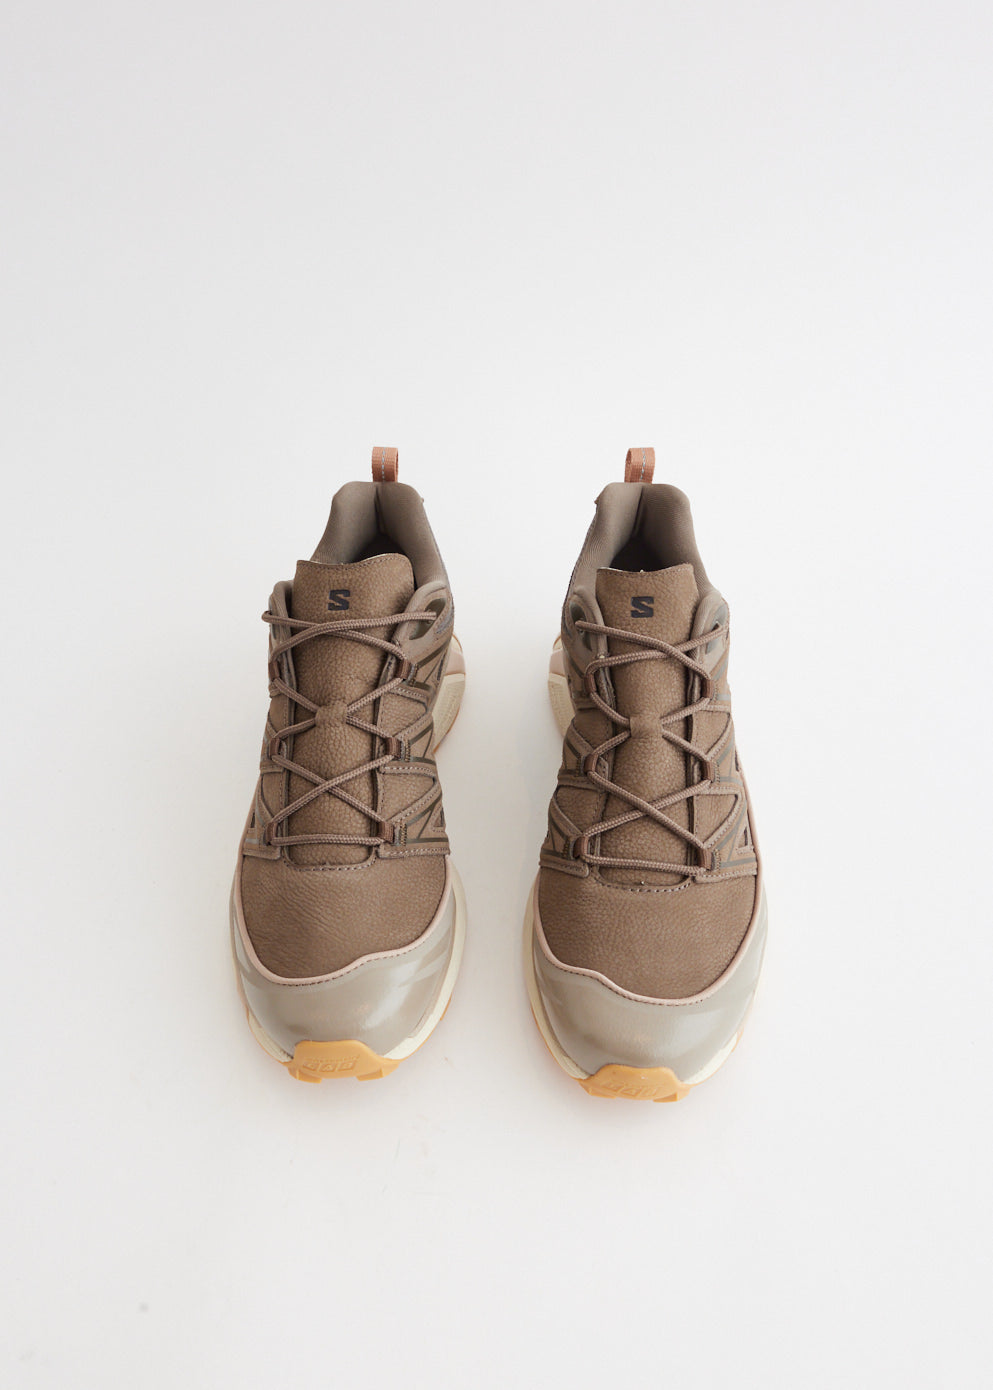 XT-6 Expanse Leather 'Bungee Cord' Sneakers